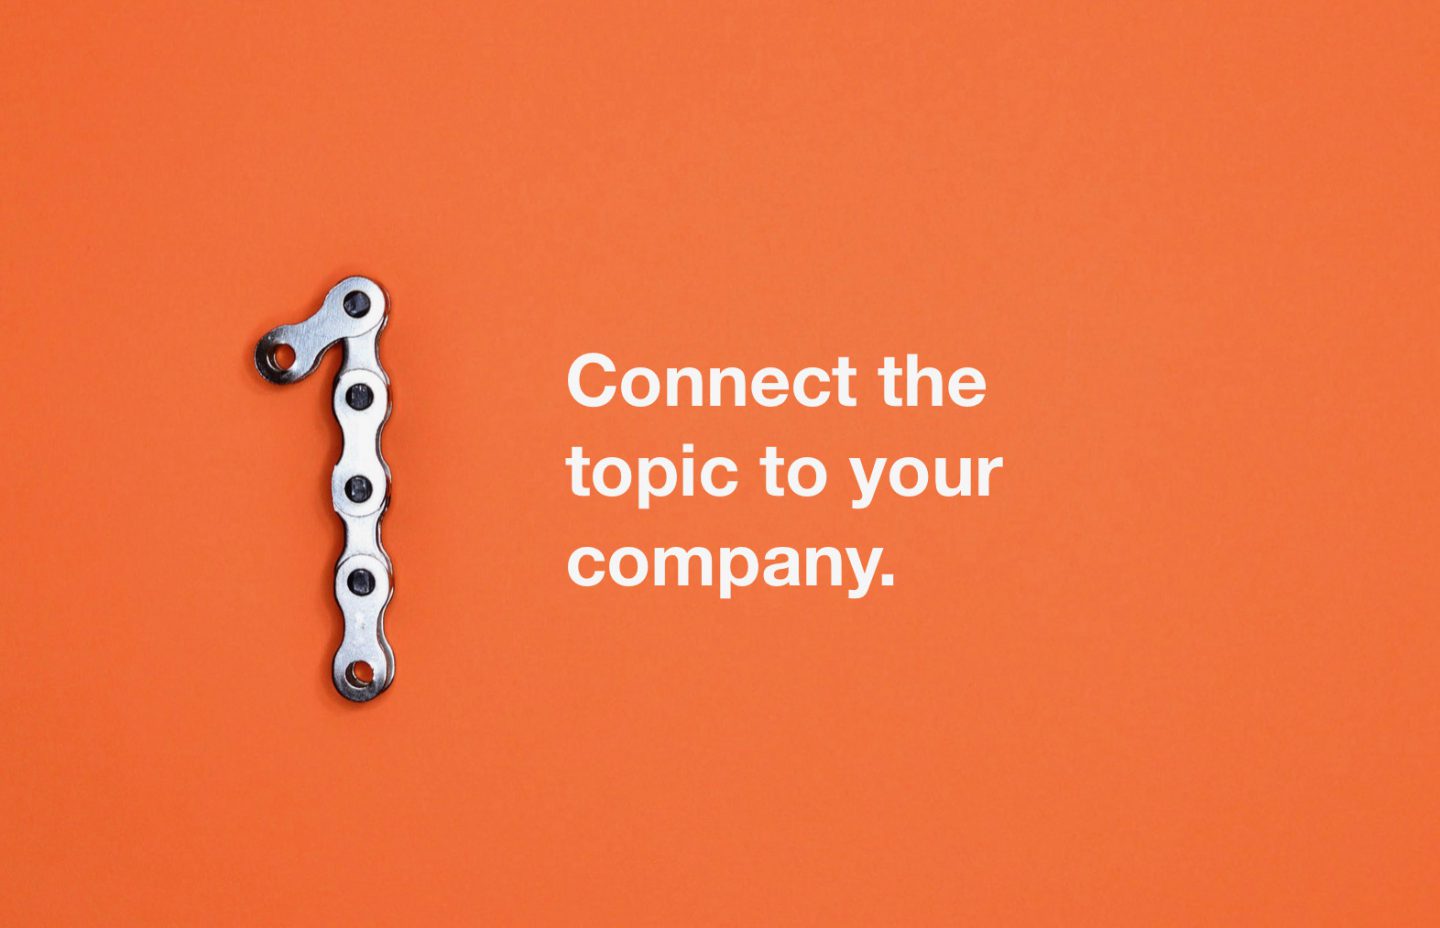 Rule 1: Connect the topic to your company.